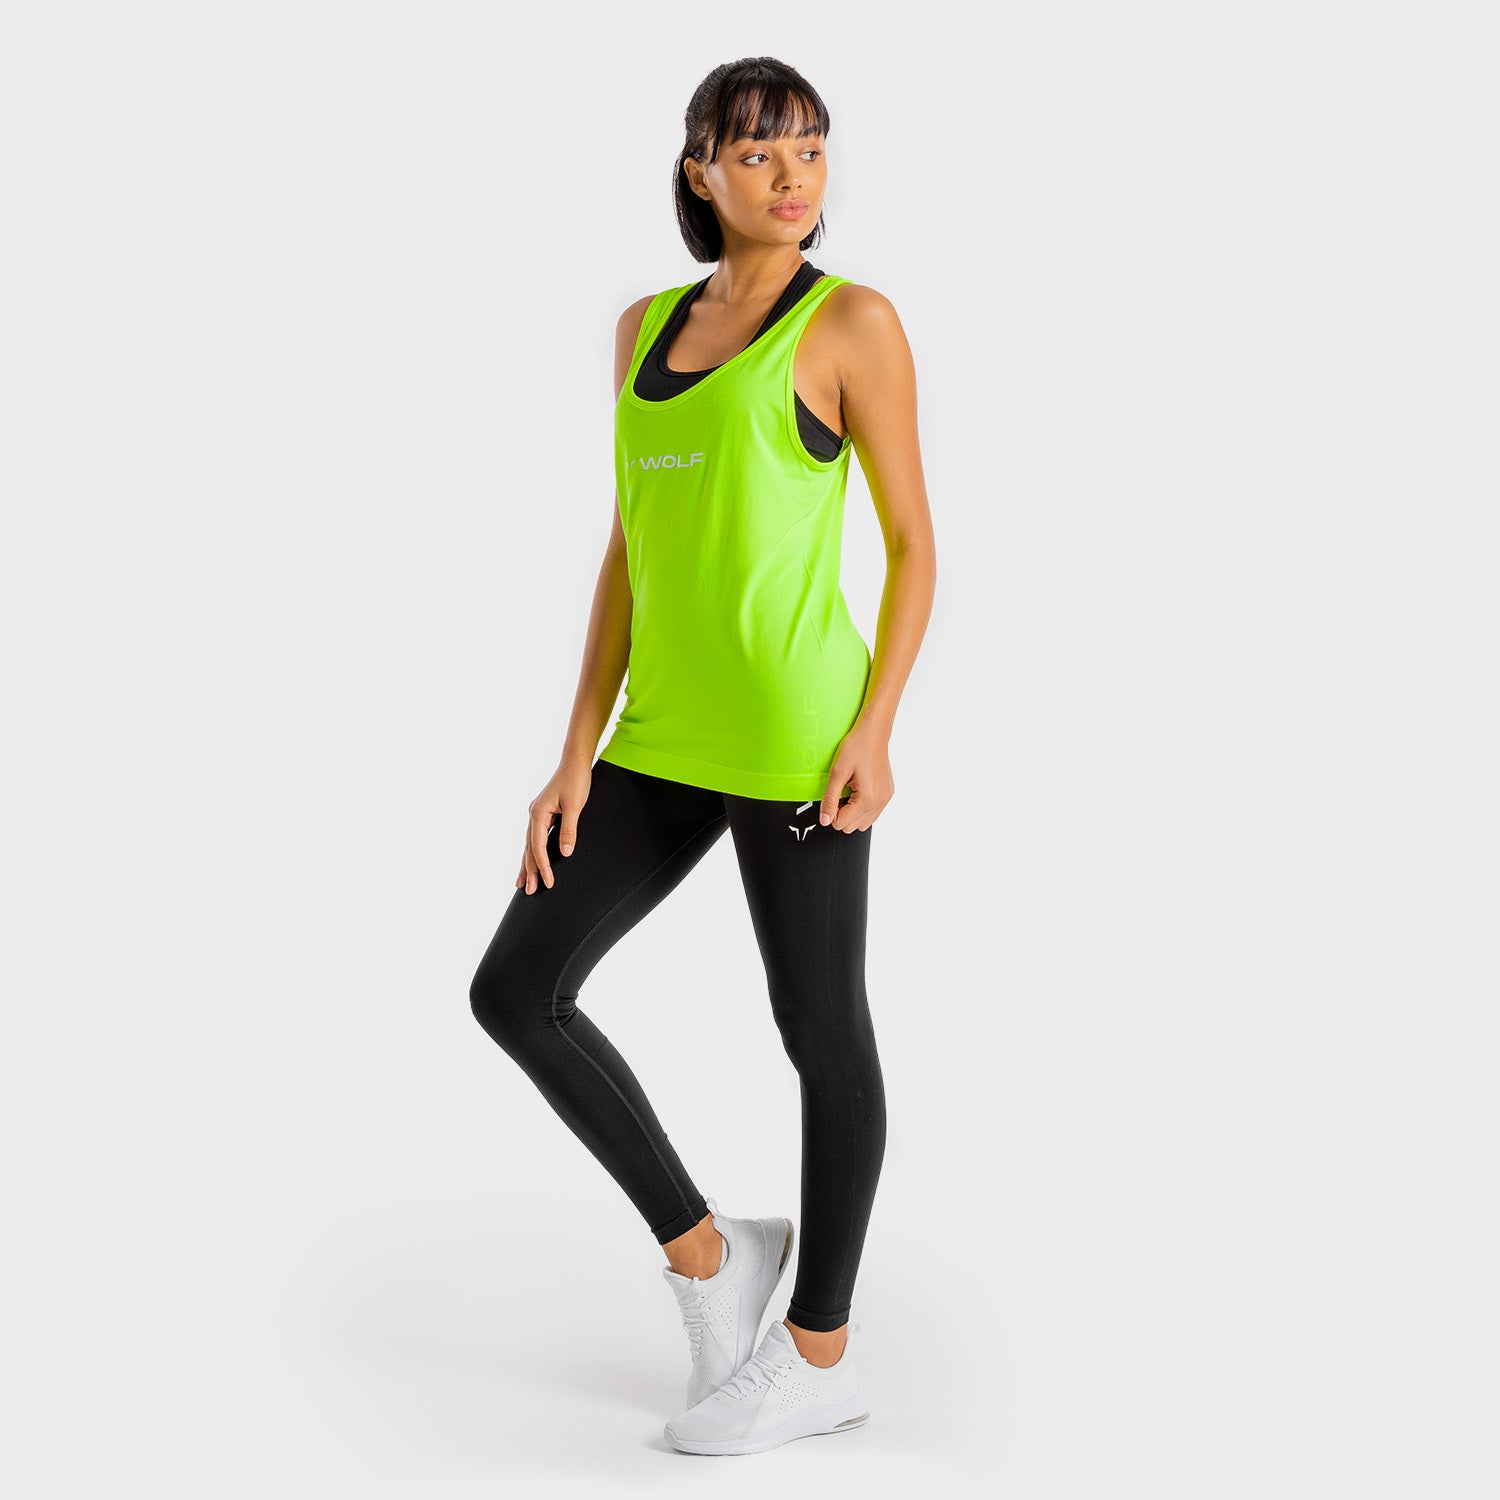 squatwolf-gym-tank-tops-for-women-primal-tank-neon-workout-clothes